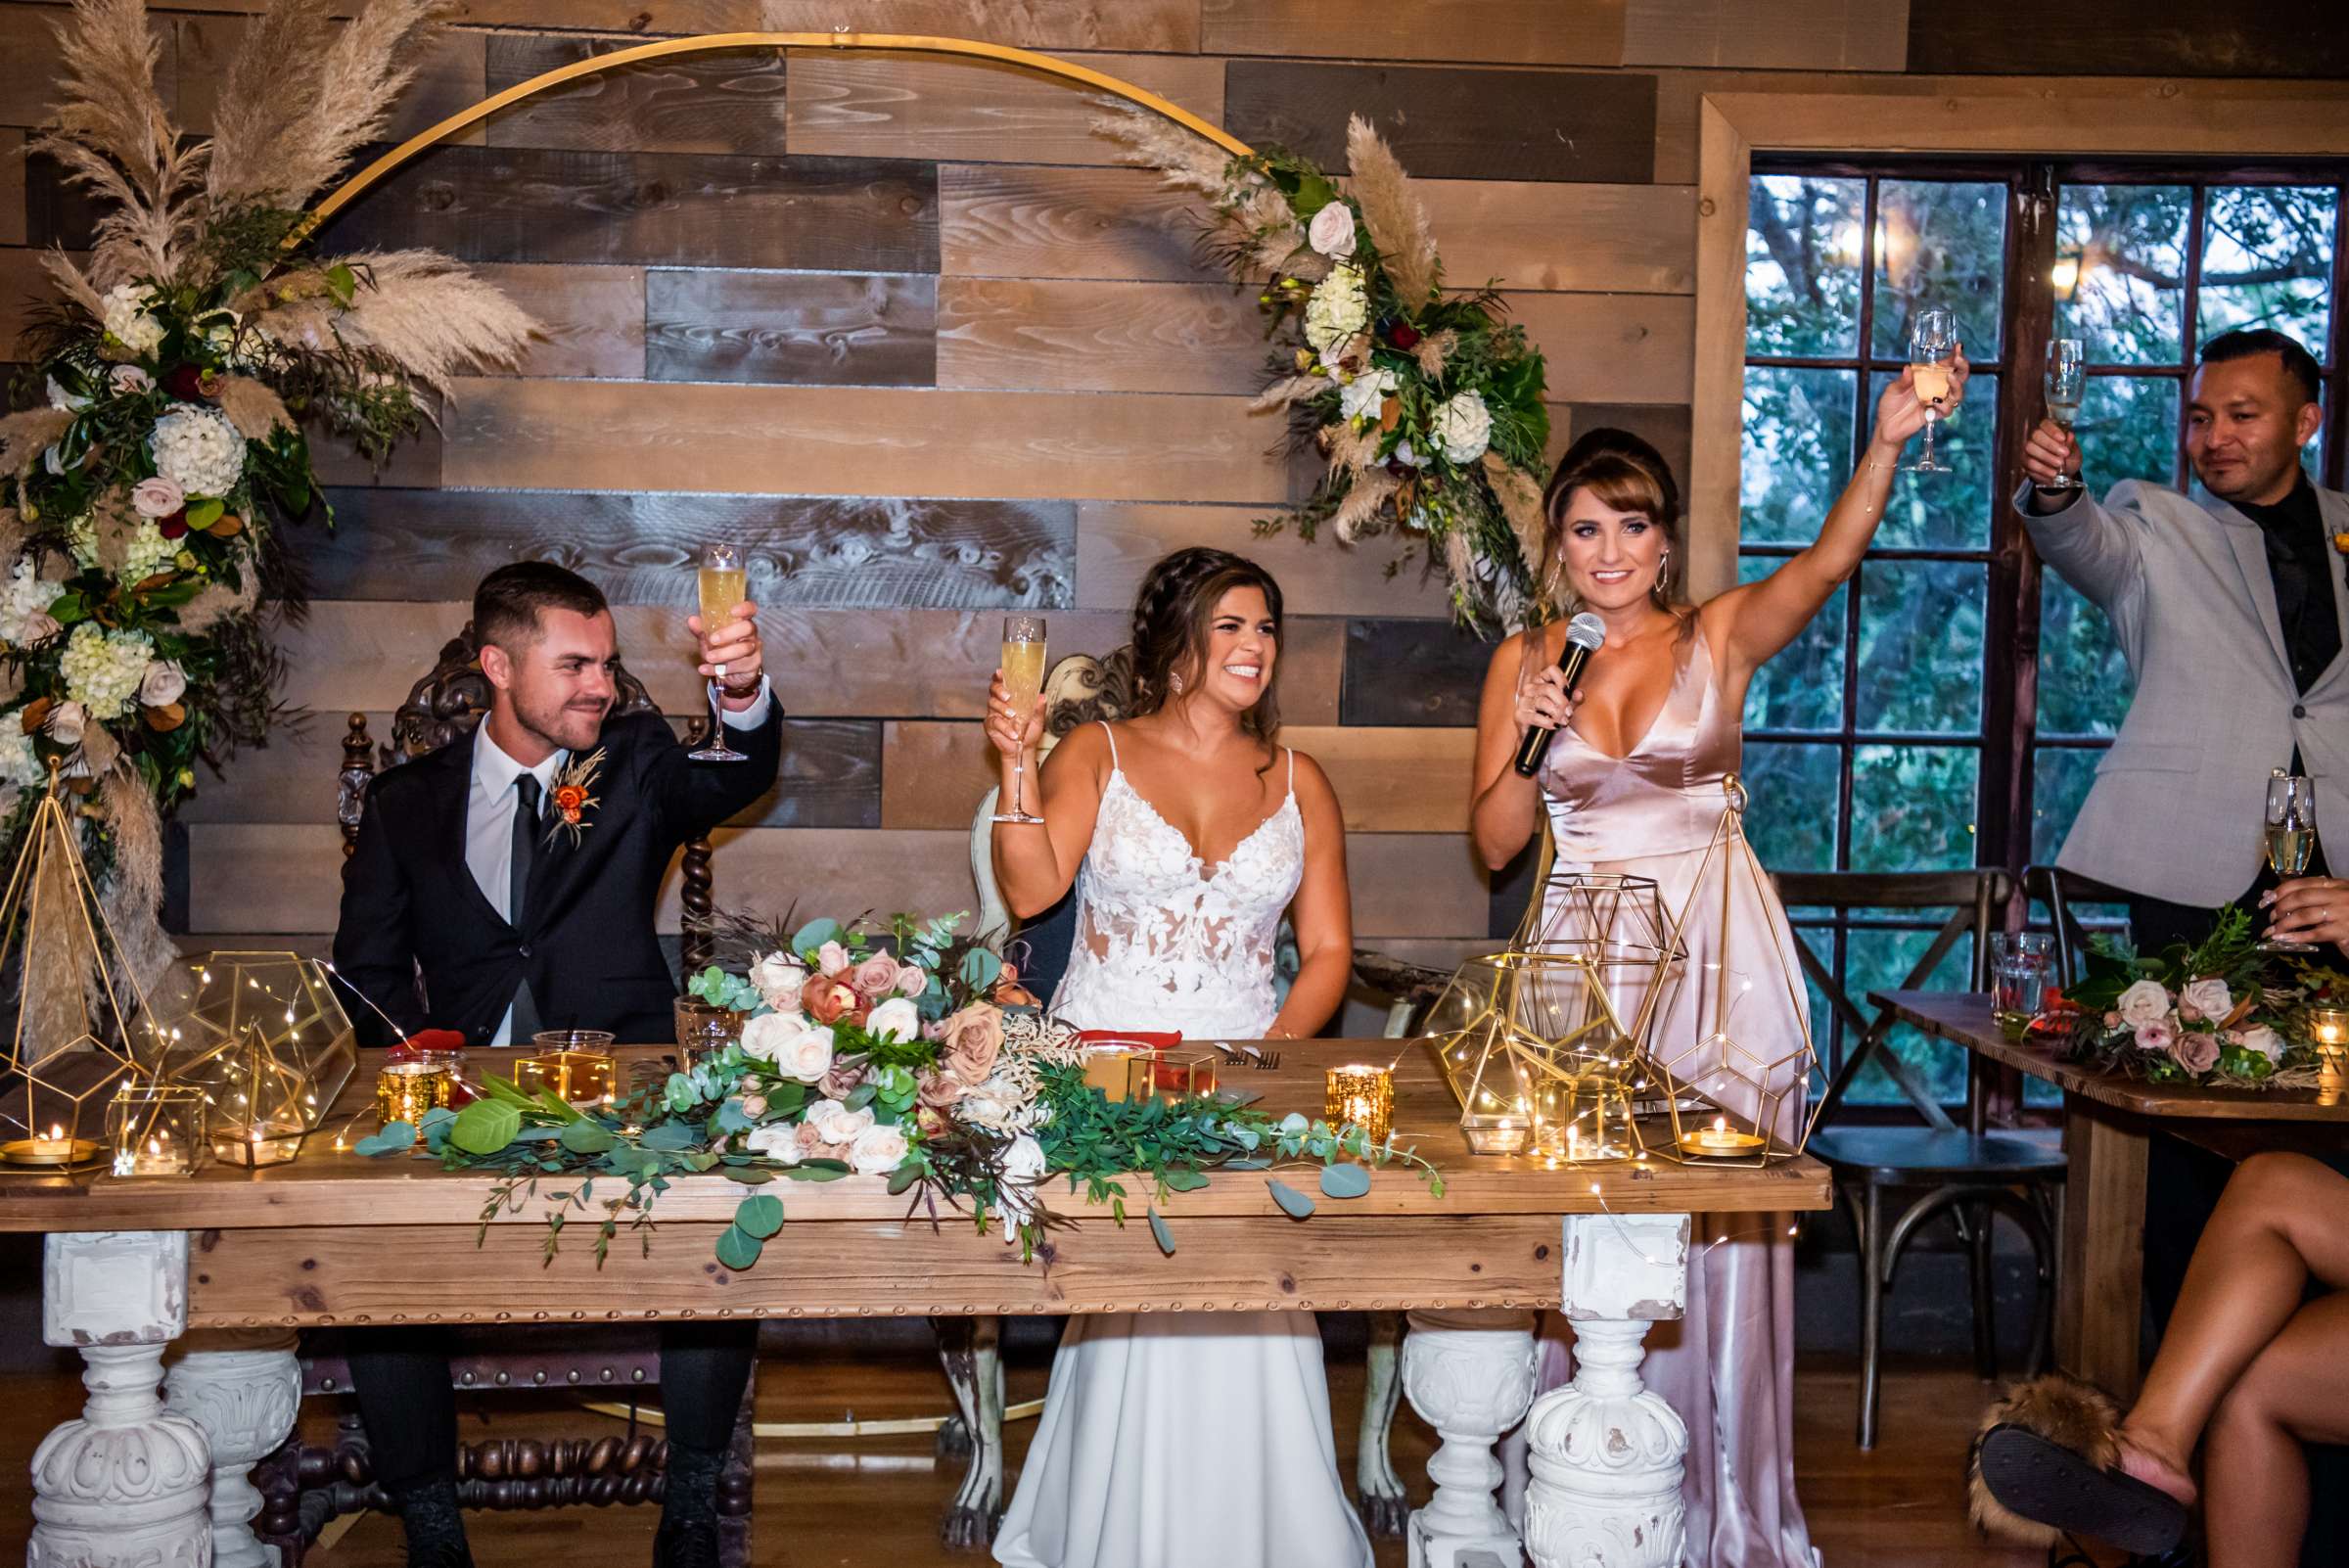 Rustic Fall Wedding Ideas to Swoon Over - Riverhouse Catering